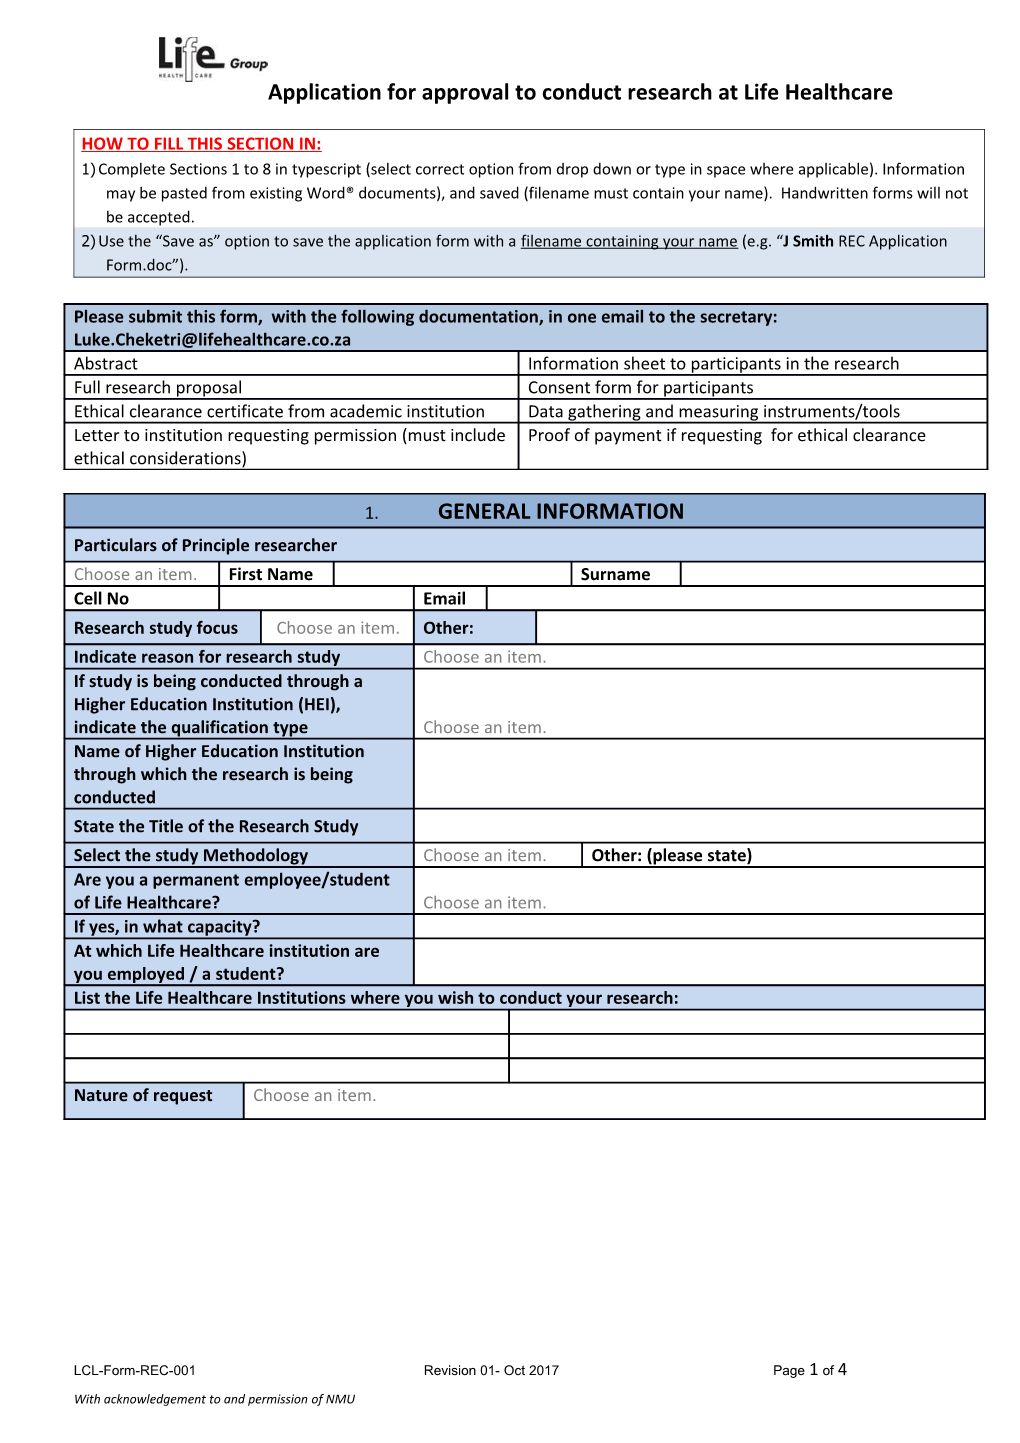 Application for Approval to Conduct Research at Life Healthcare